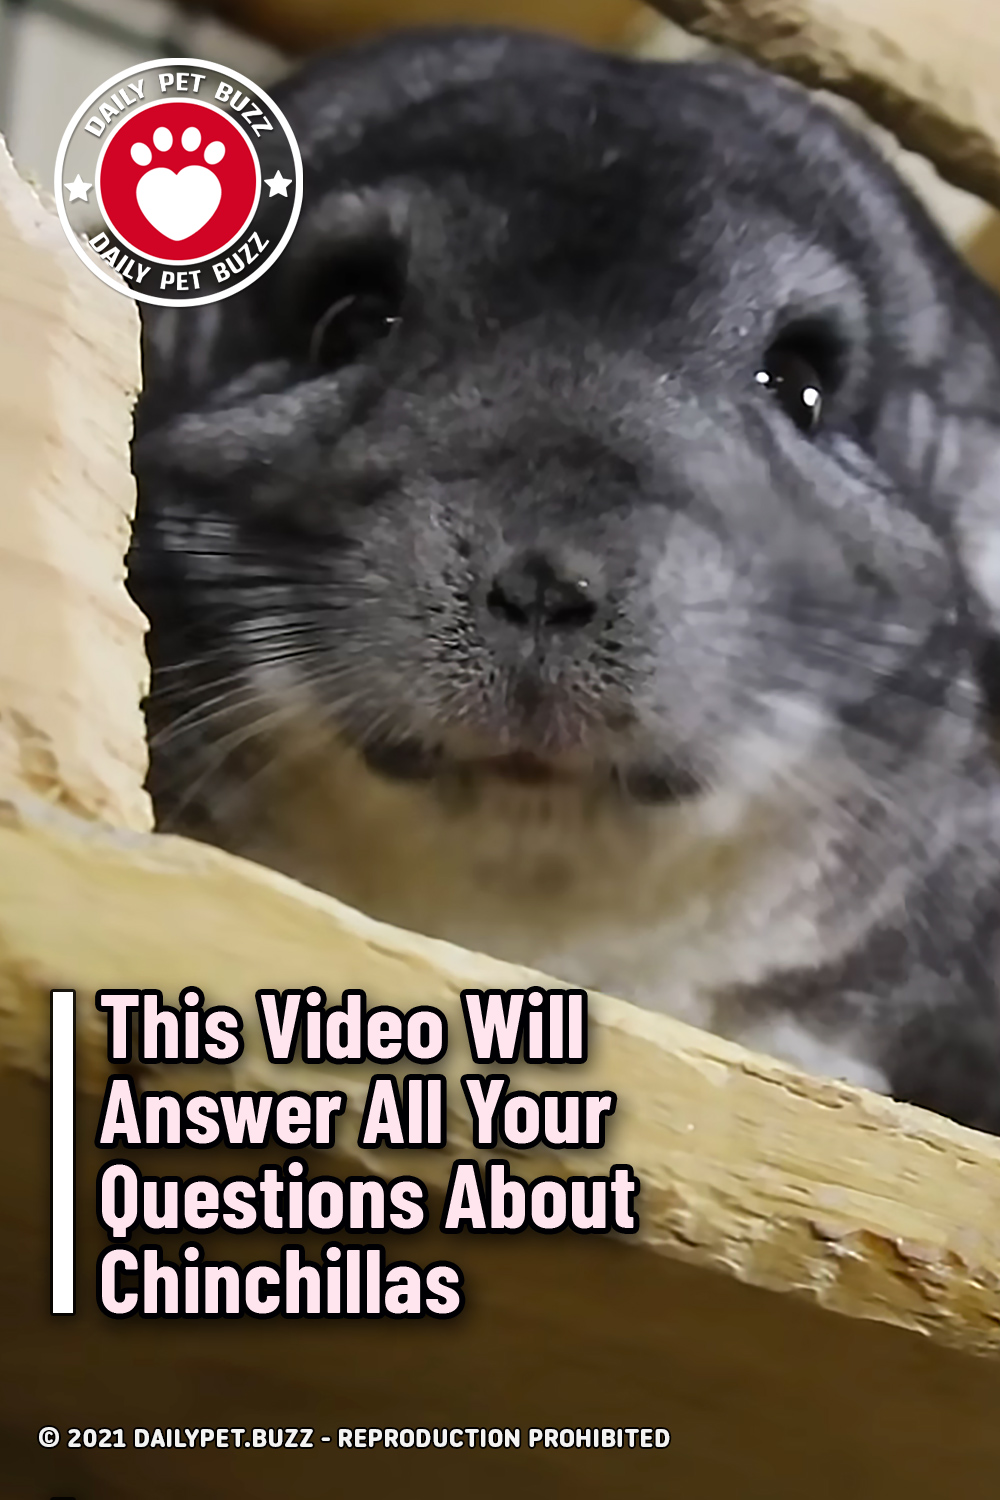 This Video Will Answer All Your Questions About Chinchillas